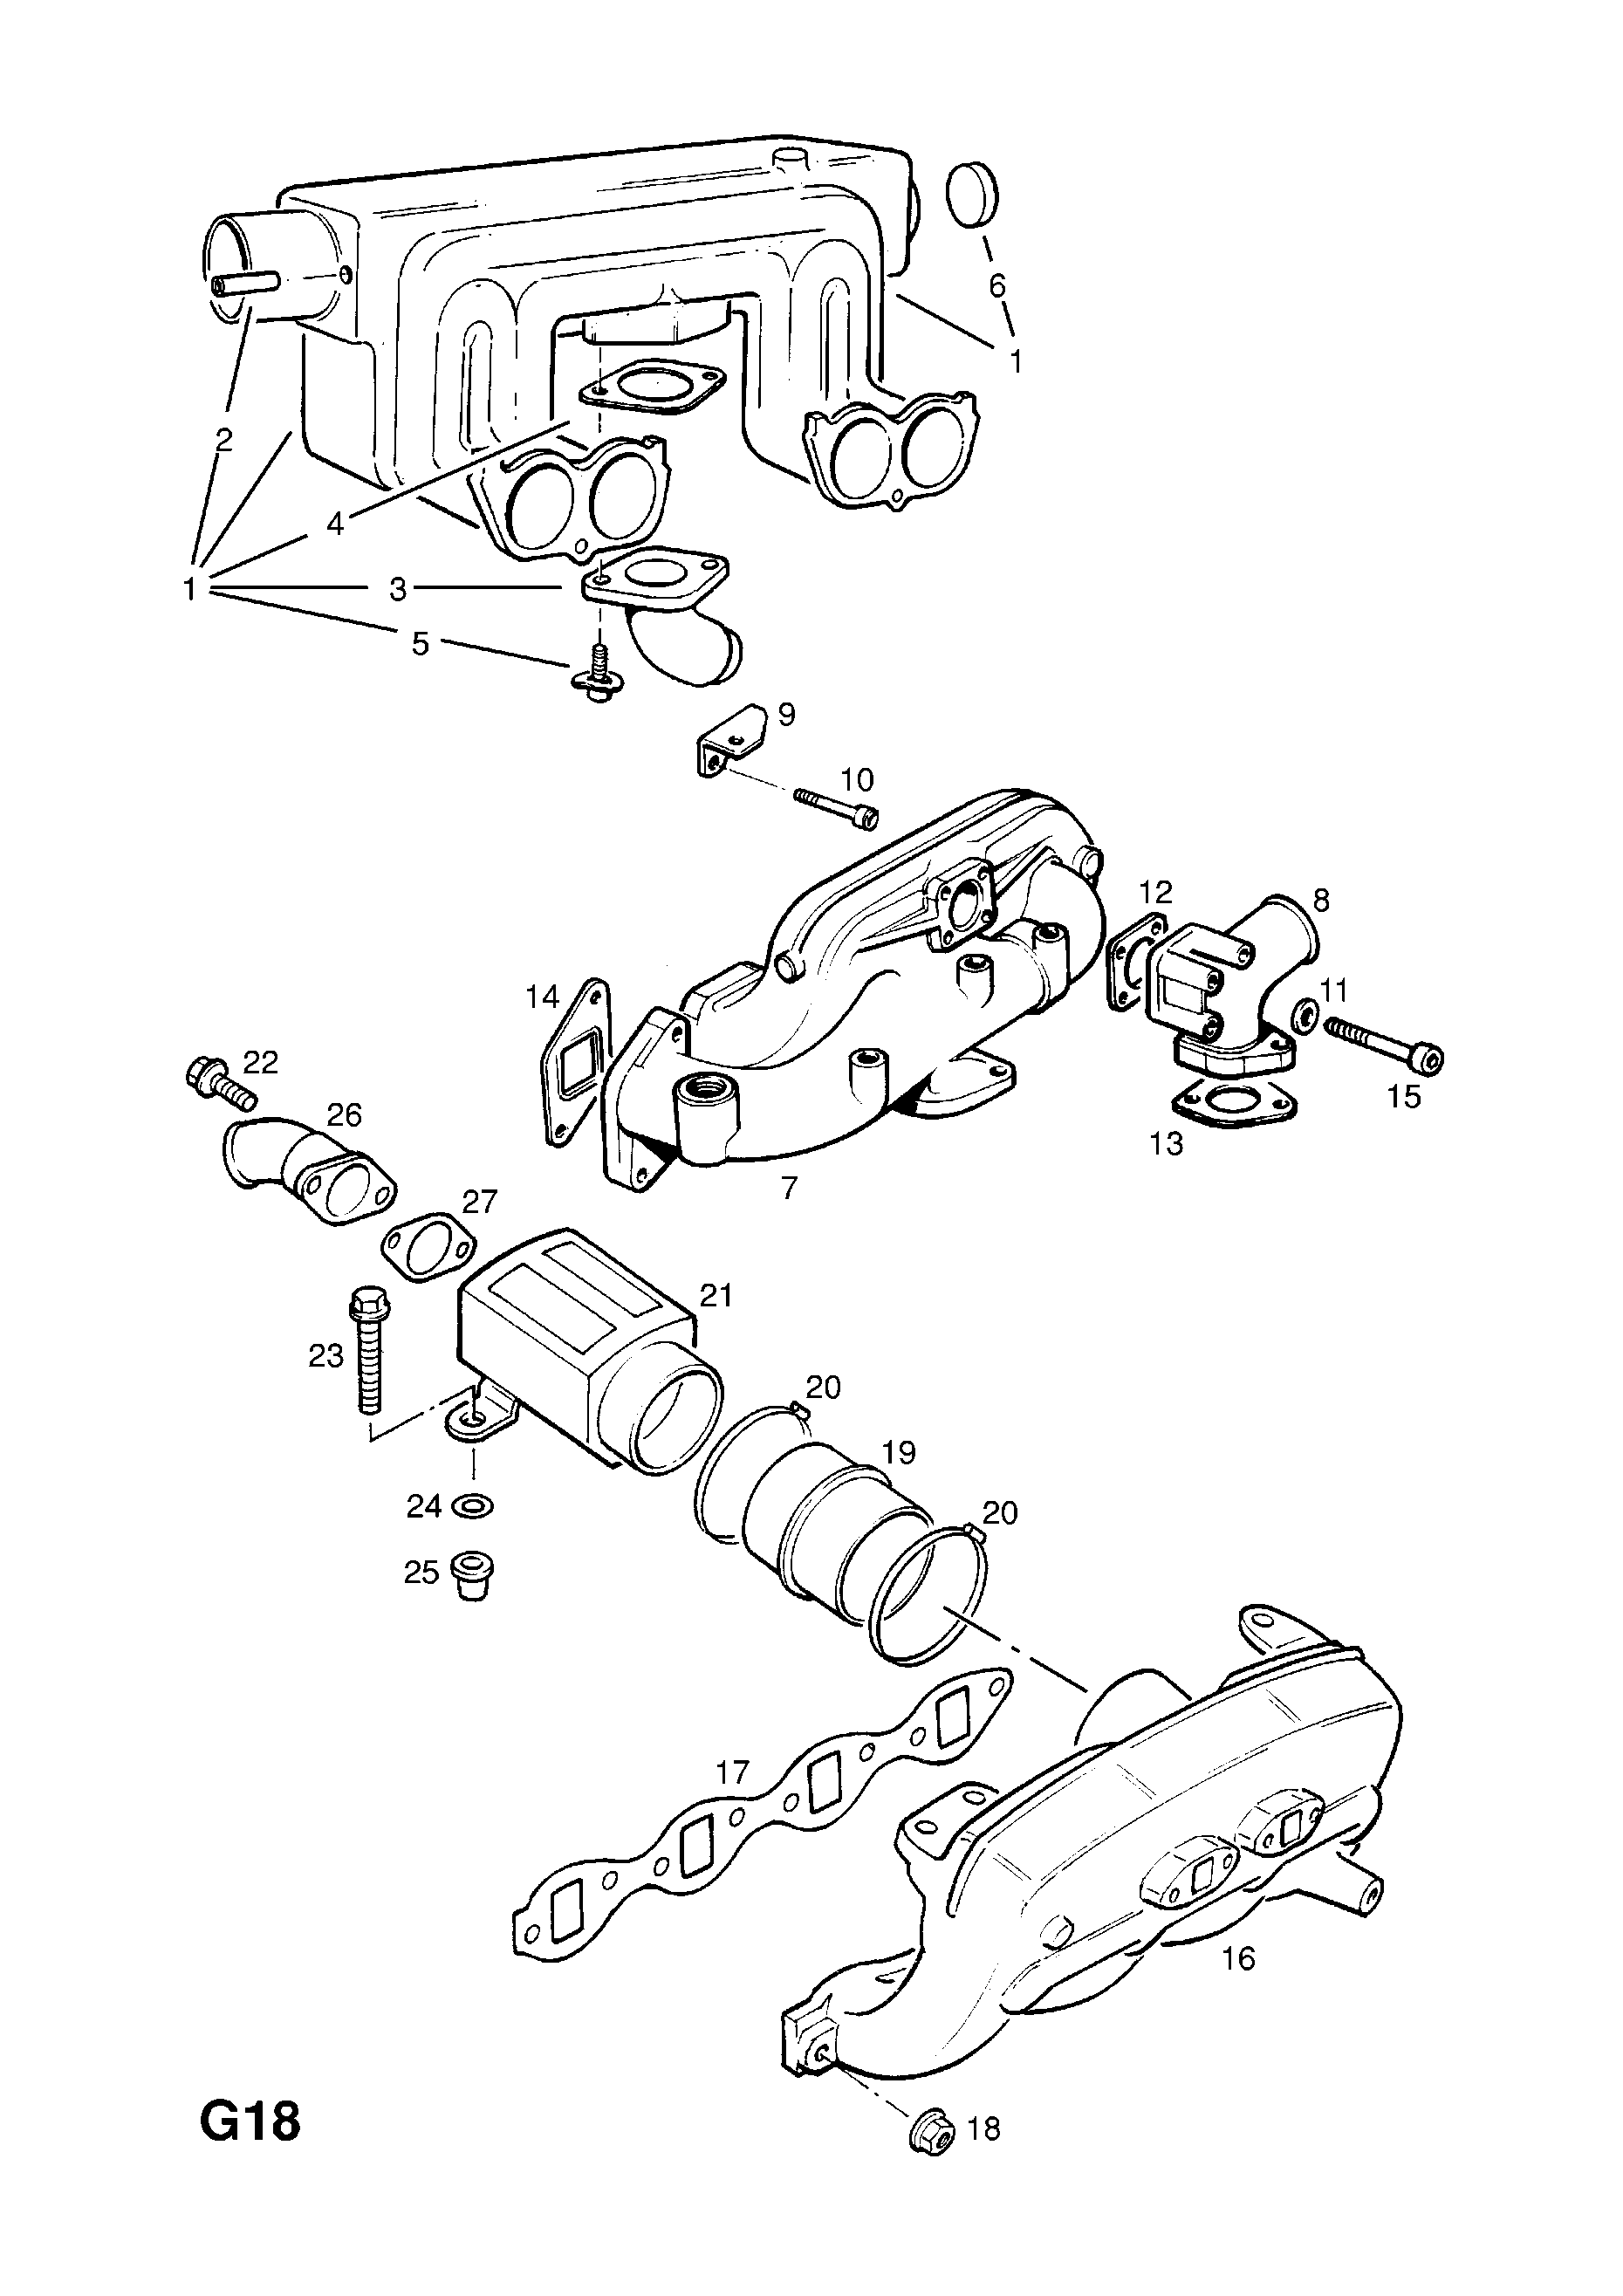 INDUCTION MANIFOLD (CONTD.) <small><i>[23TD DIESEL ENGINE]</i></small>